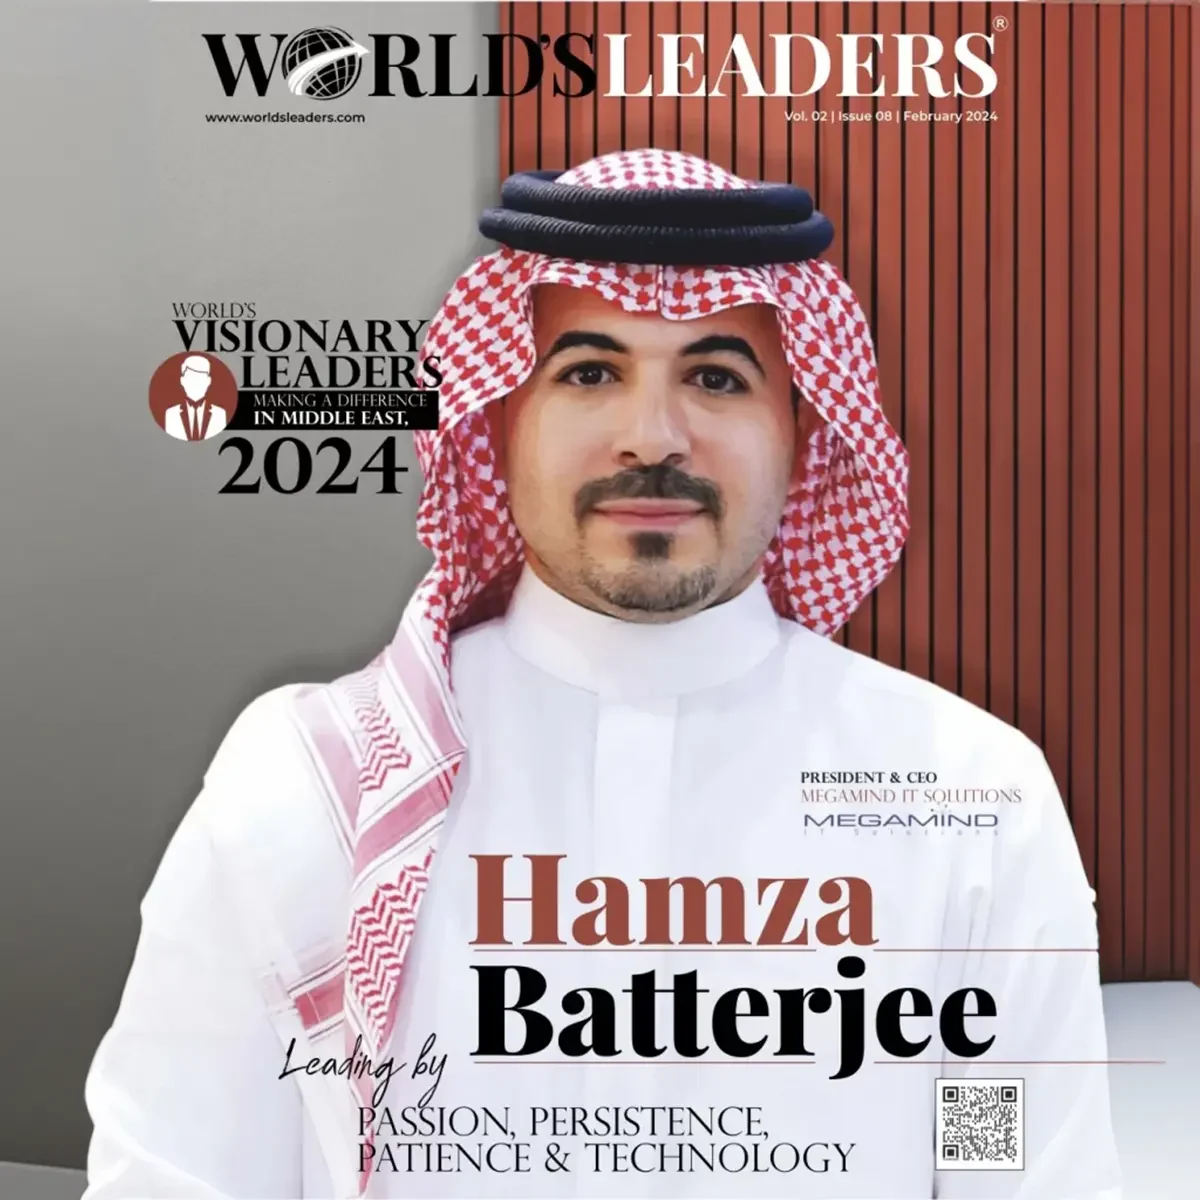 World's Leaders Magazine has recognized Mr. Hamza as the World’s Visionary Leaders Making A Difference in Middle East, 2024